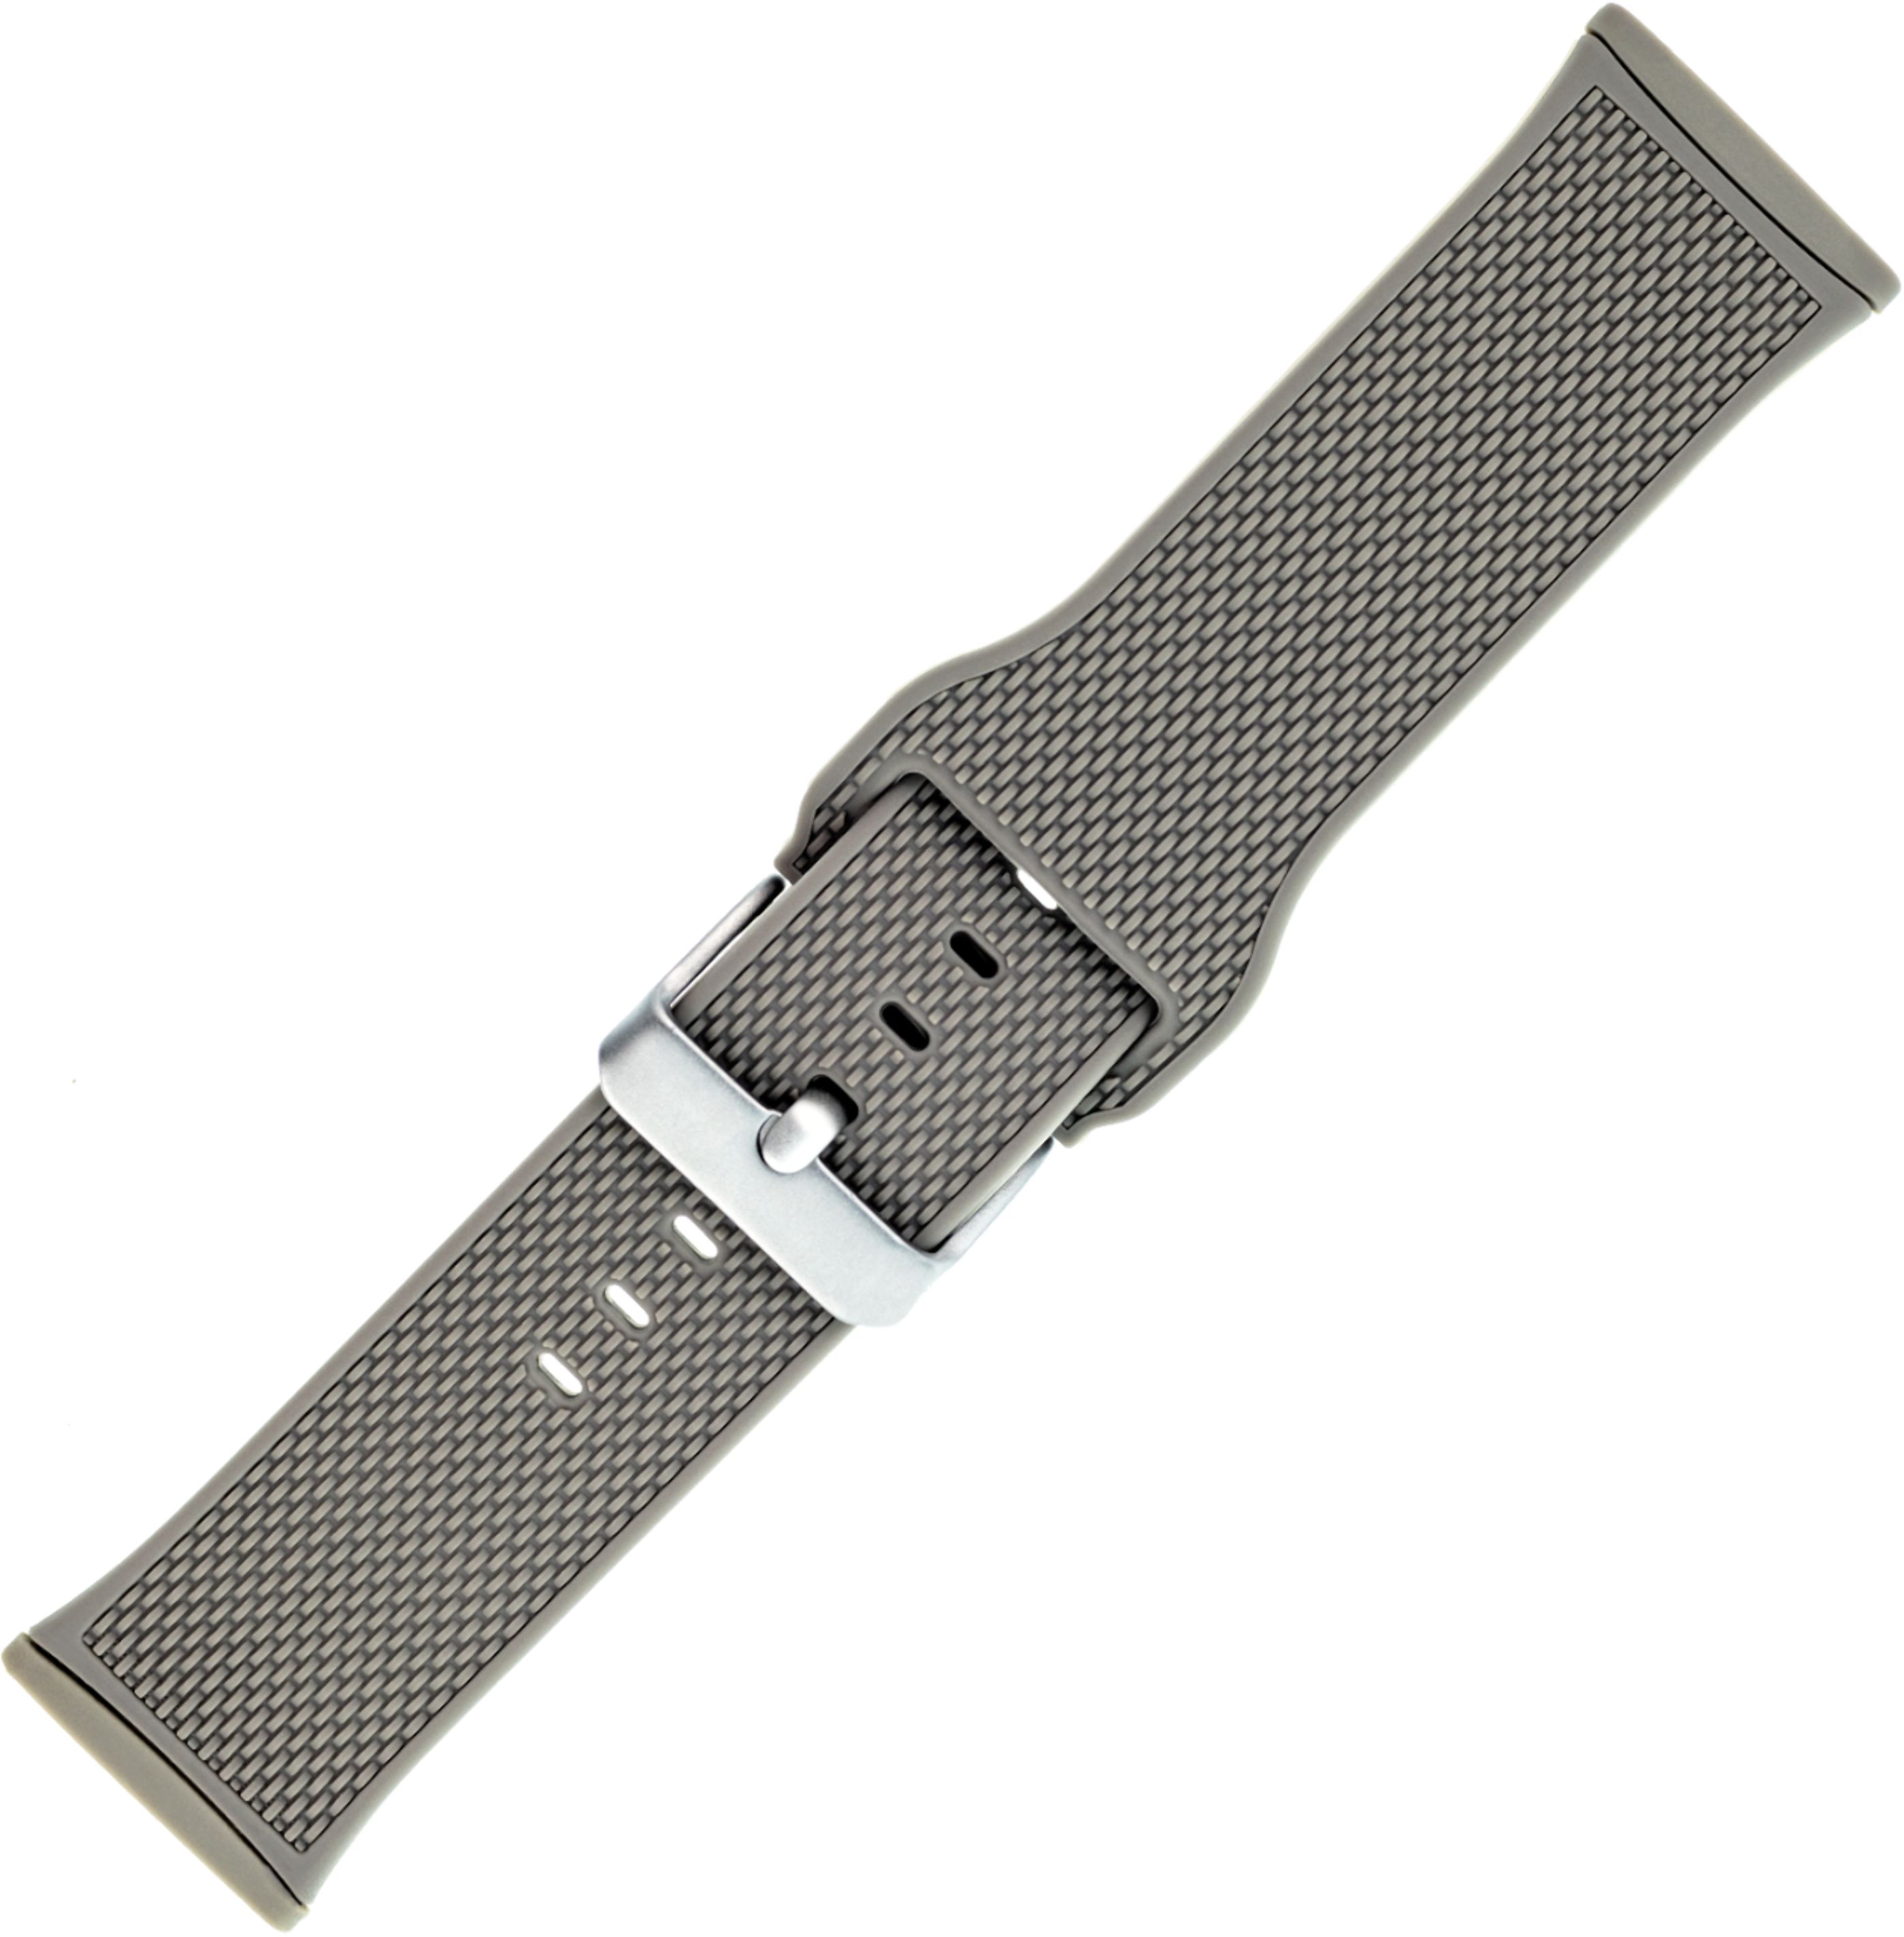 WITHit Fitbit Versa 3 & Fitbit Sense Silicone One size fits all Watch band  Navy/Light Gray/Blush Pink 54403BBR - Best Buy